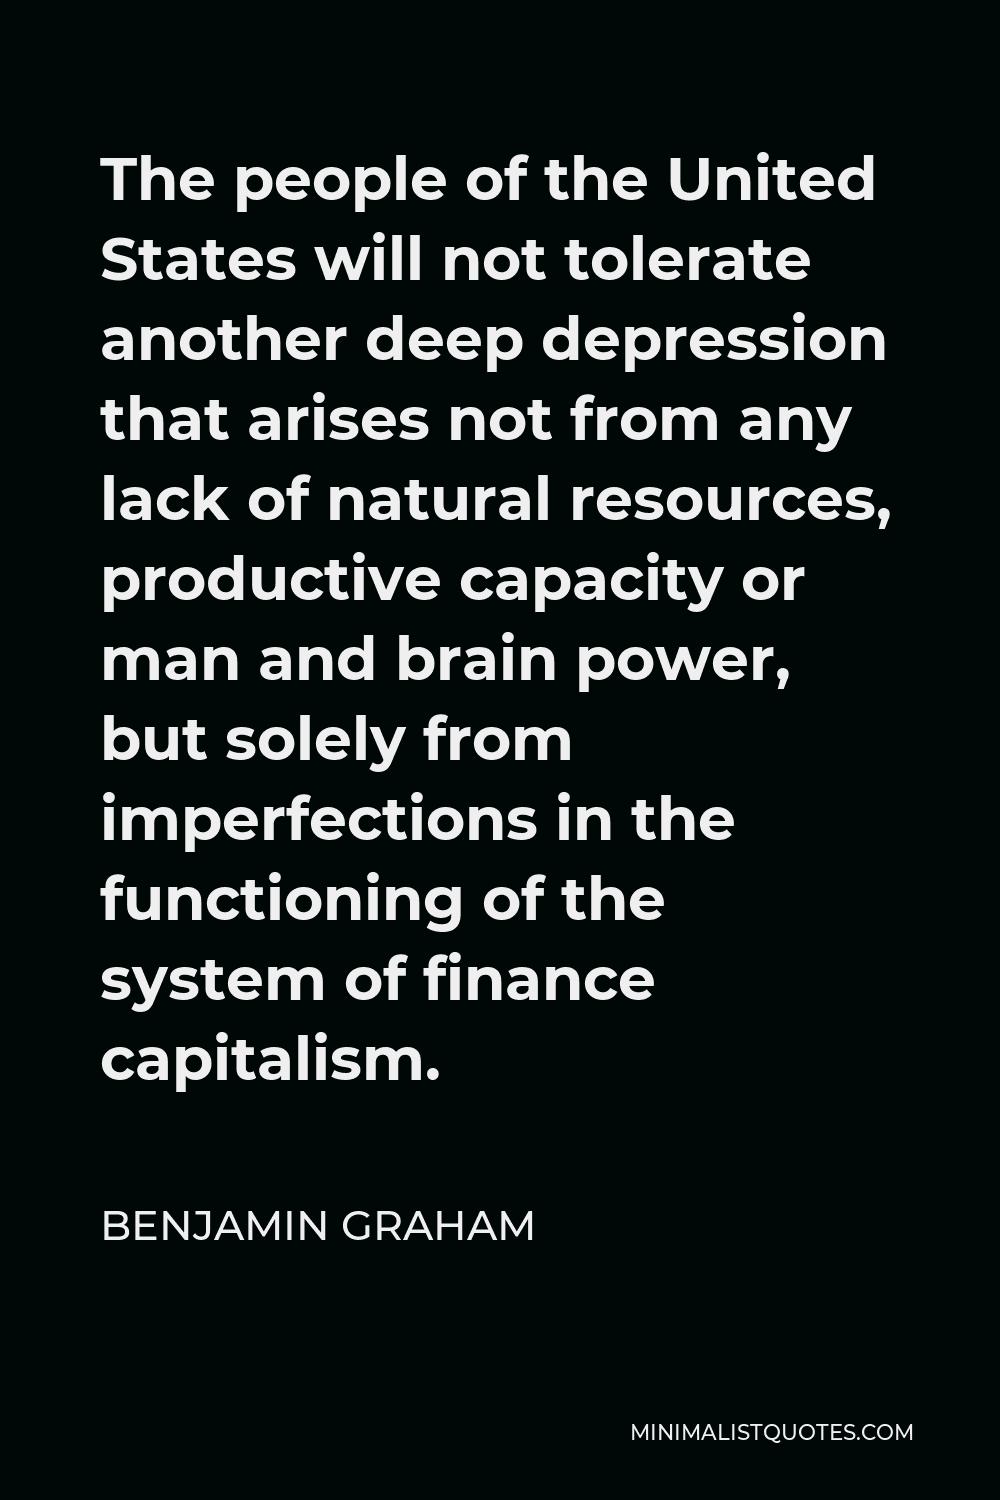 Benjamin Graham Quote - The people of the United States will not tolerate another deep depression that arises not from any lack of natural resources, productive capacity or man and brain power, but solely from imperfections in the functioning of the system of finance capitalism.